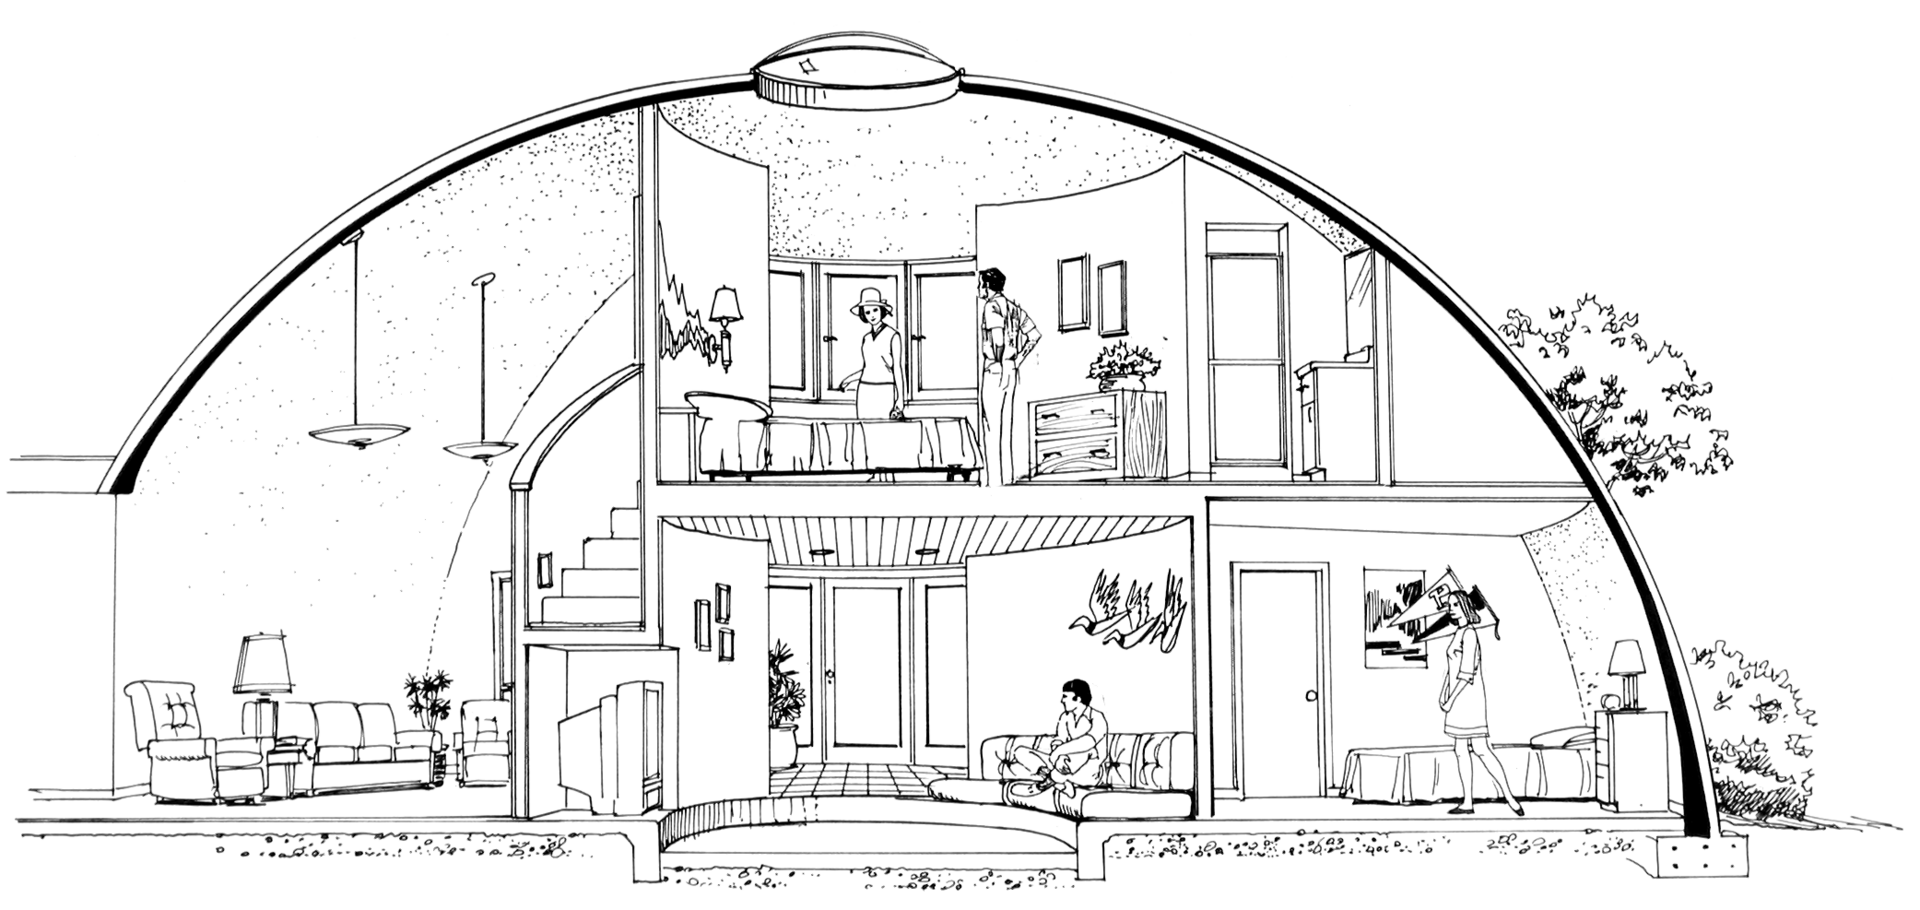 Artist's concept sketch of interior of a large Monolithic Dome home.